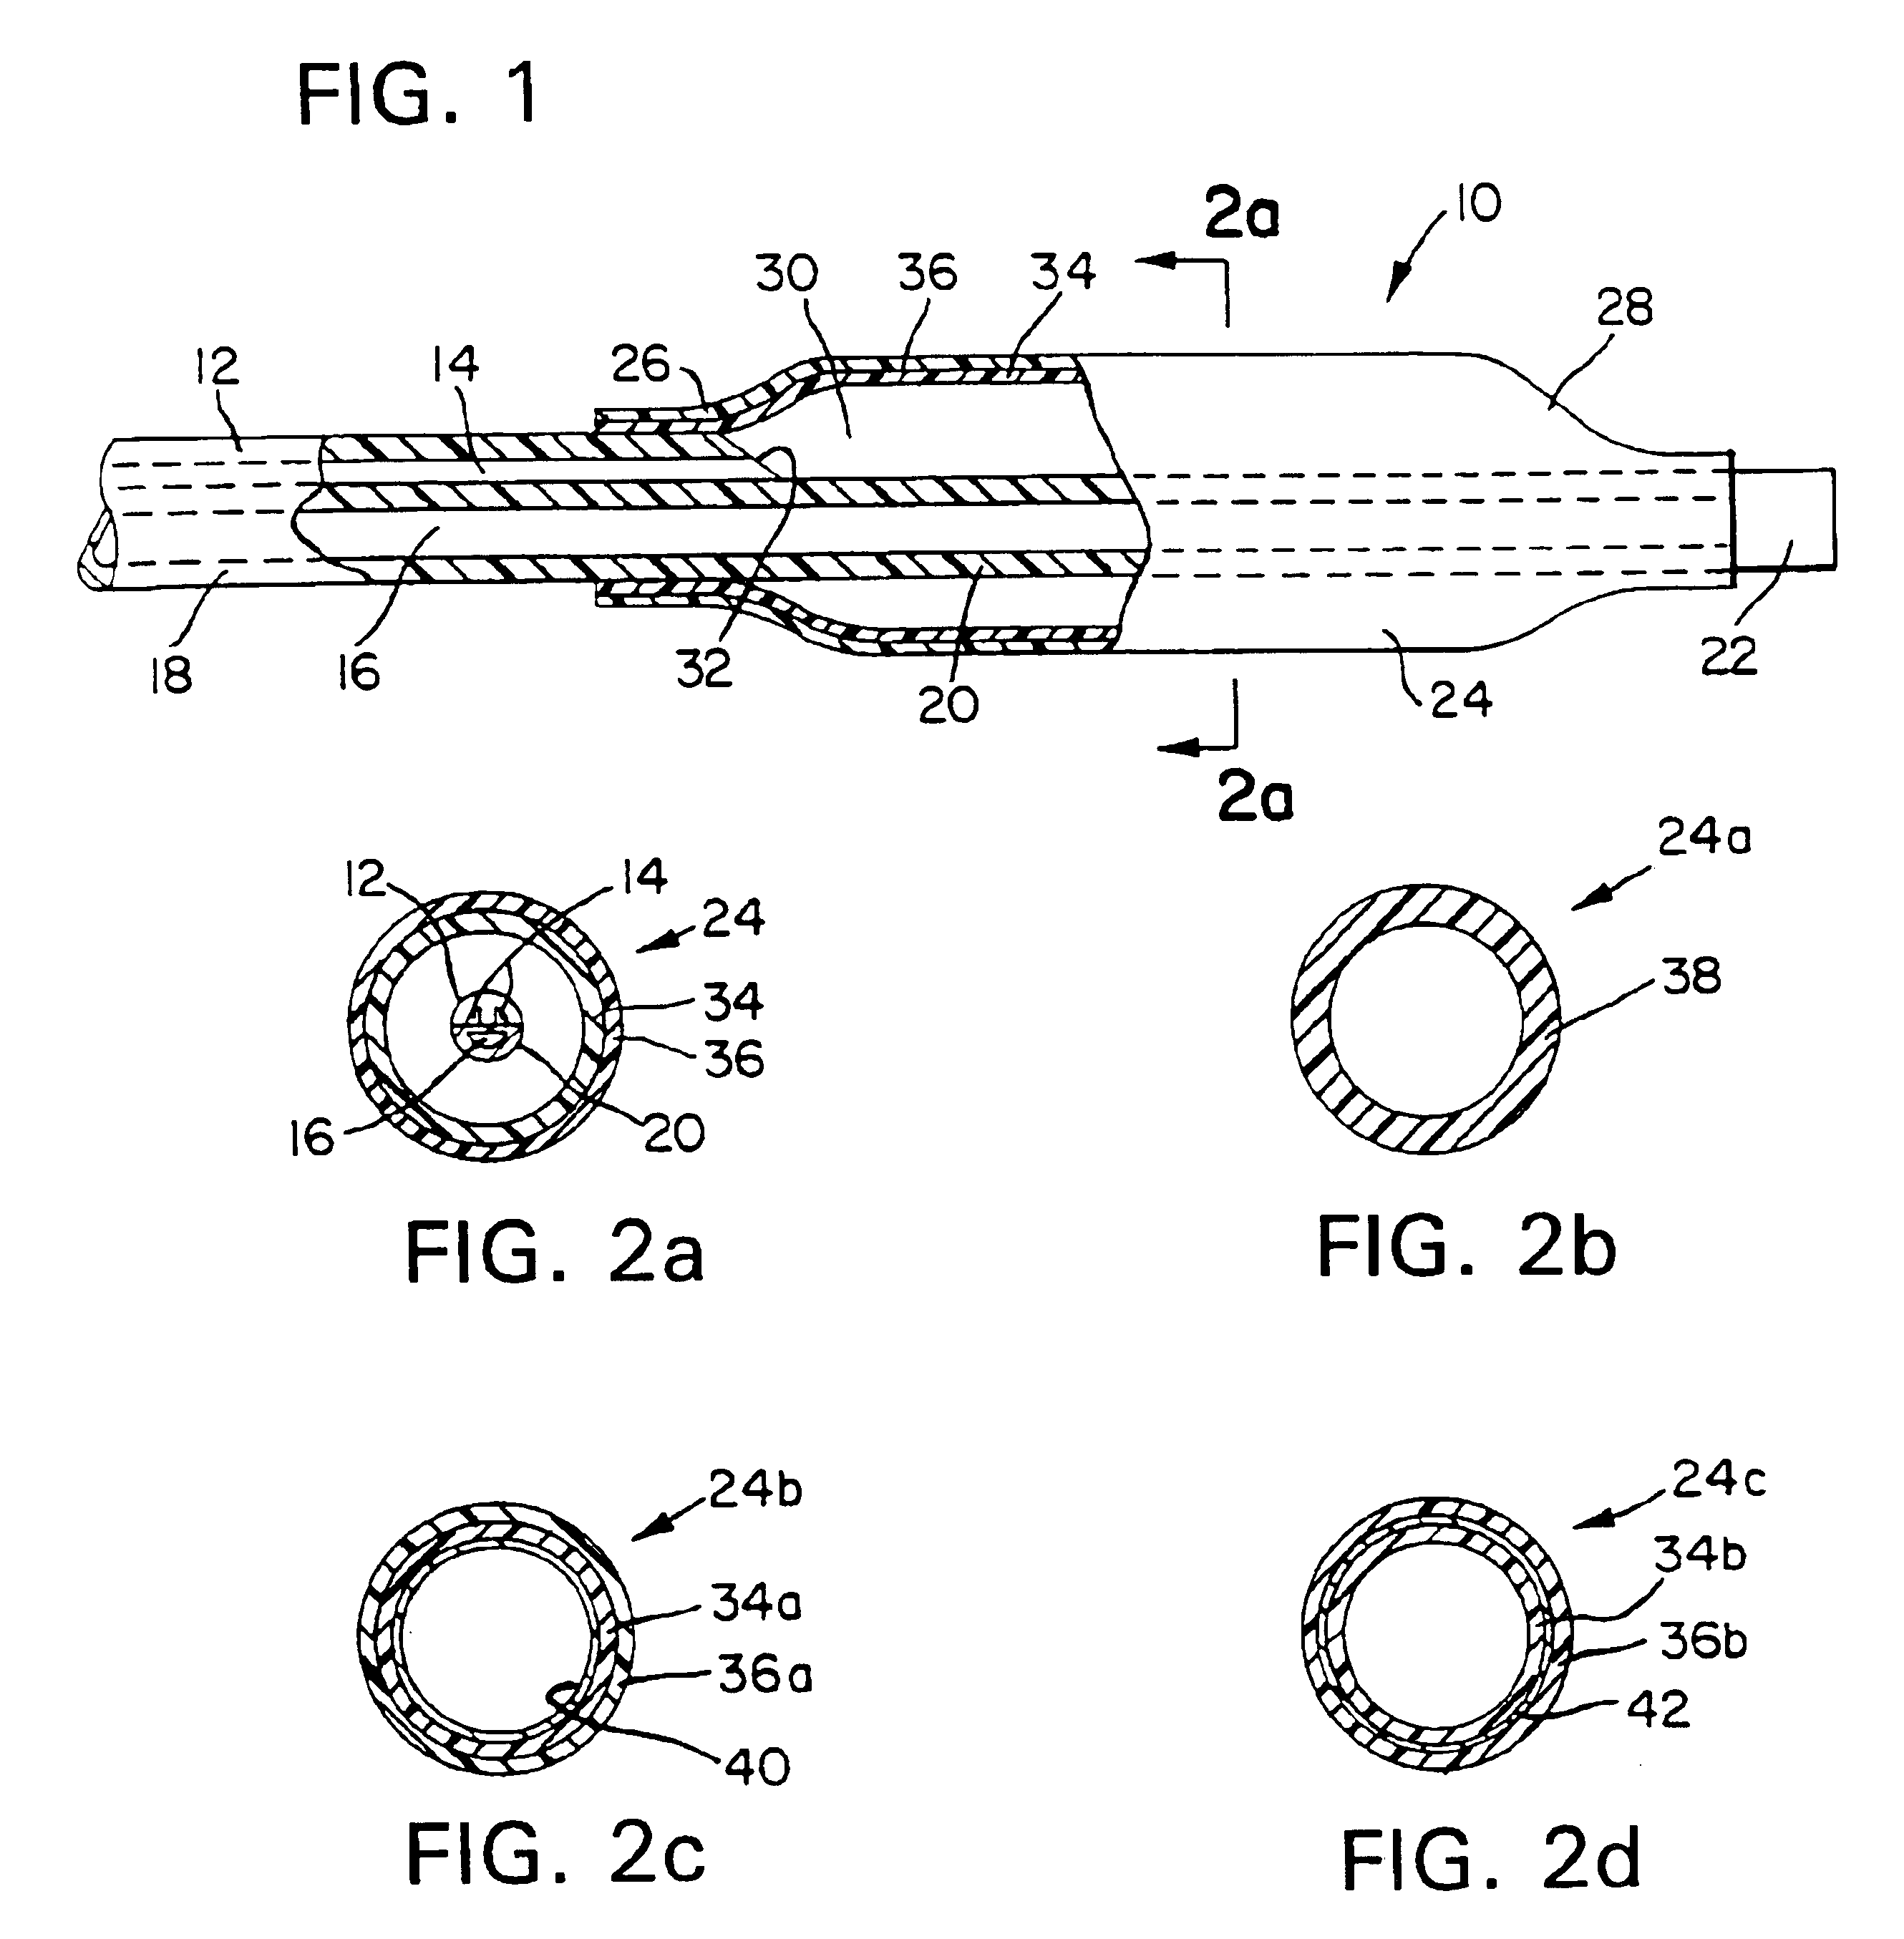 Medical device balloons containing thermoplastic elastomers